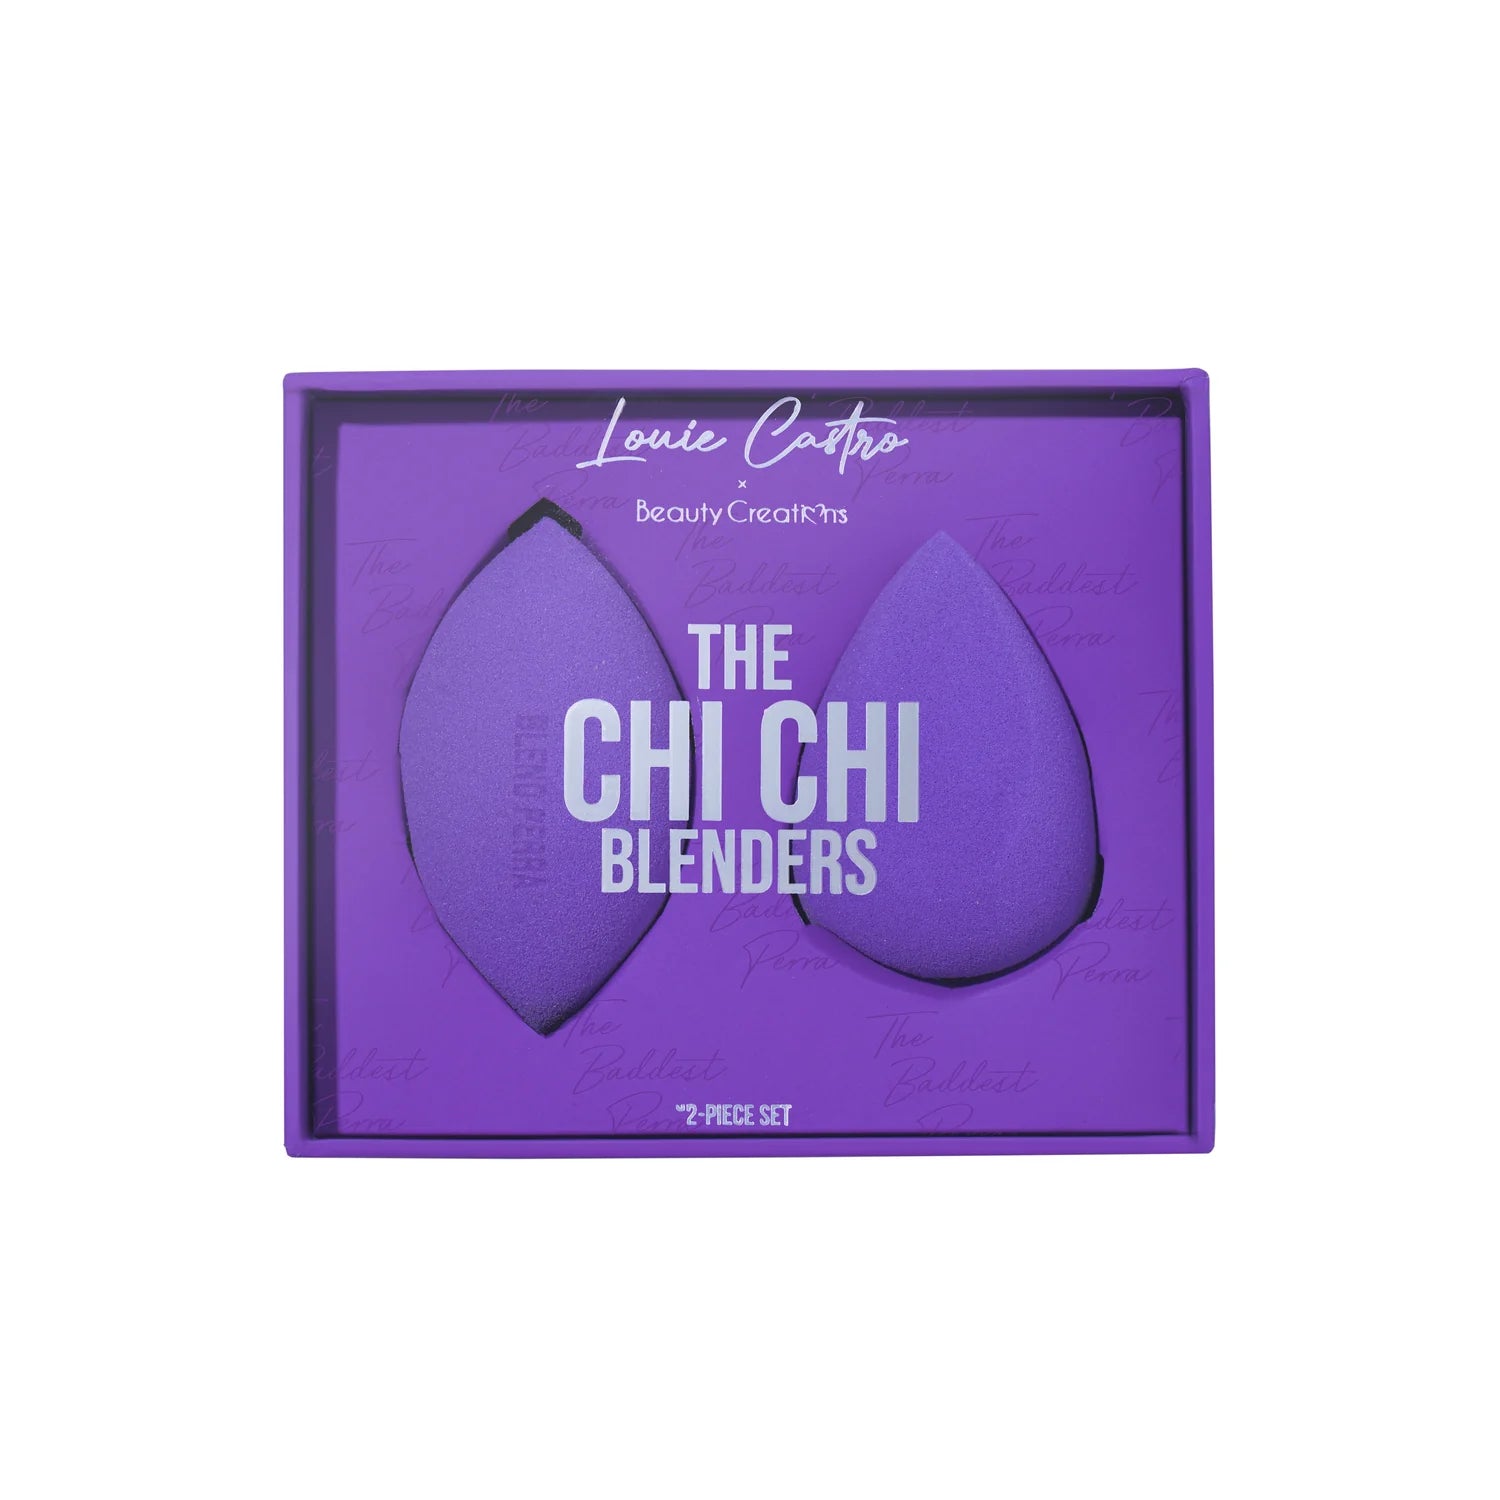 Beauty Creations - Louie Castro The CHI CHI Blenders Duo